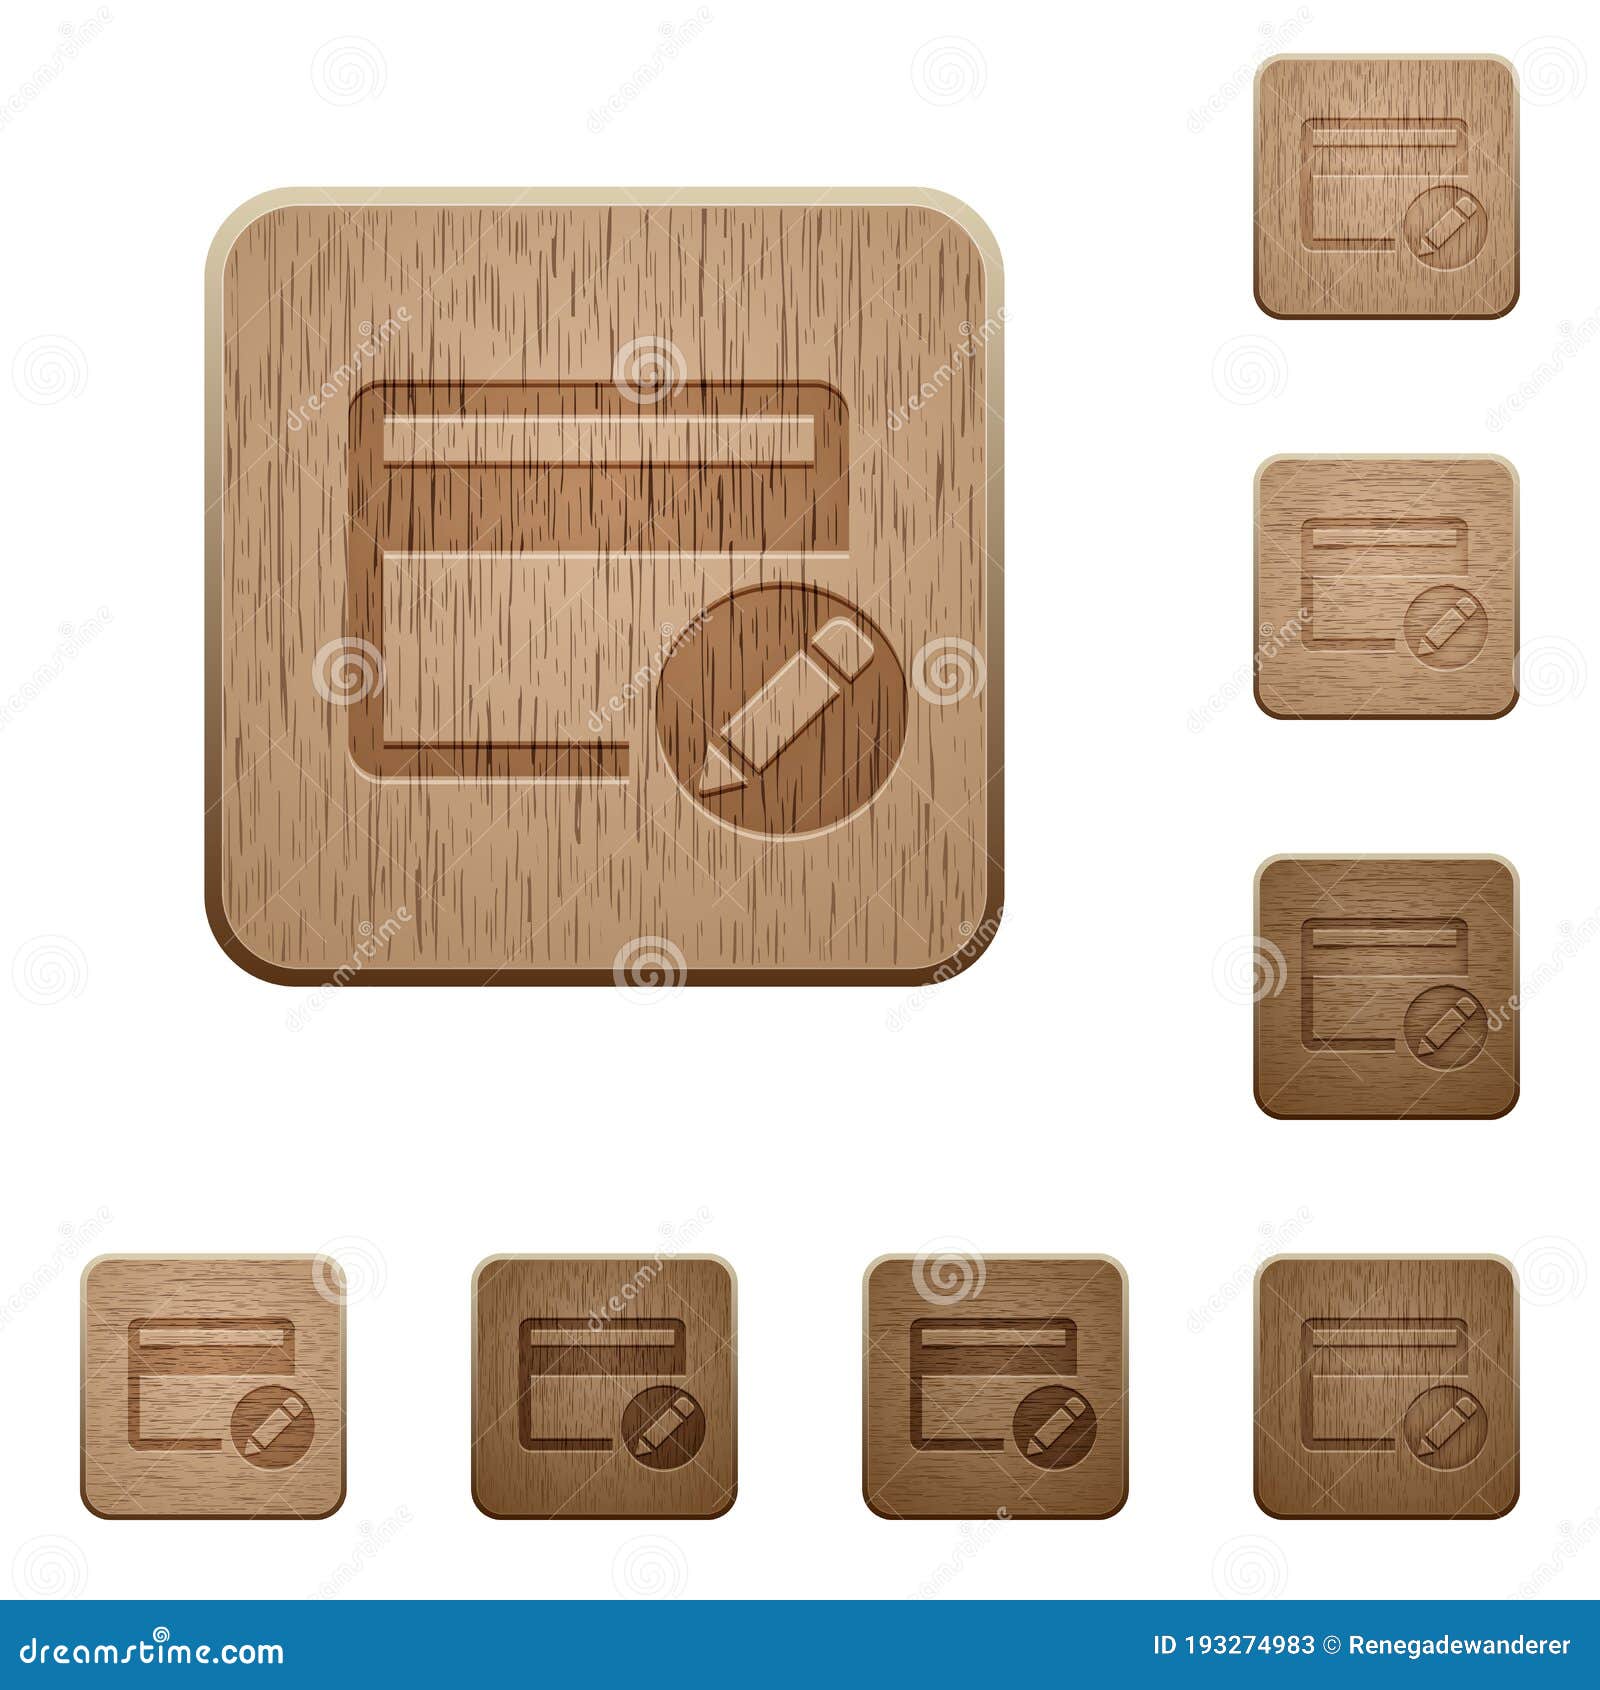 rename credit card wooden buttons